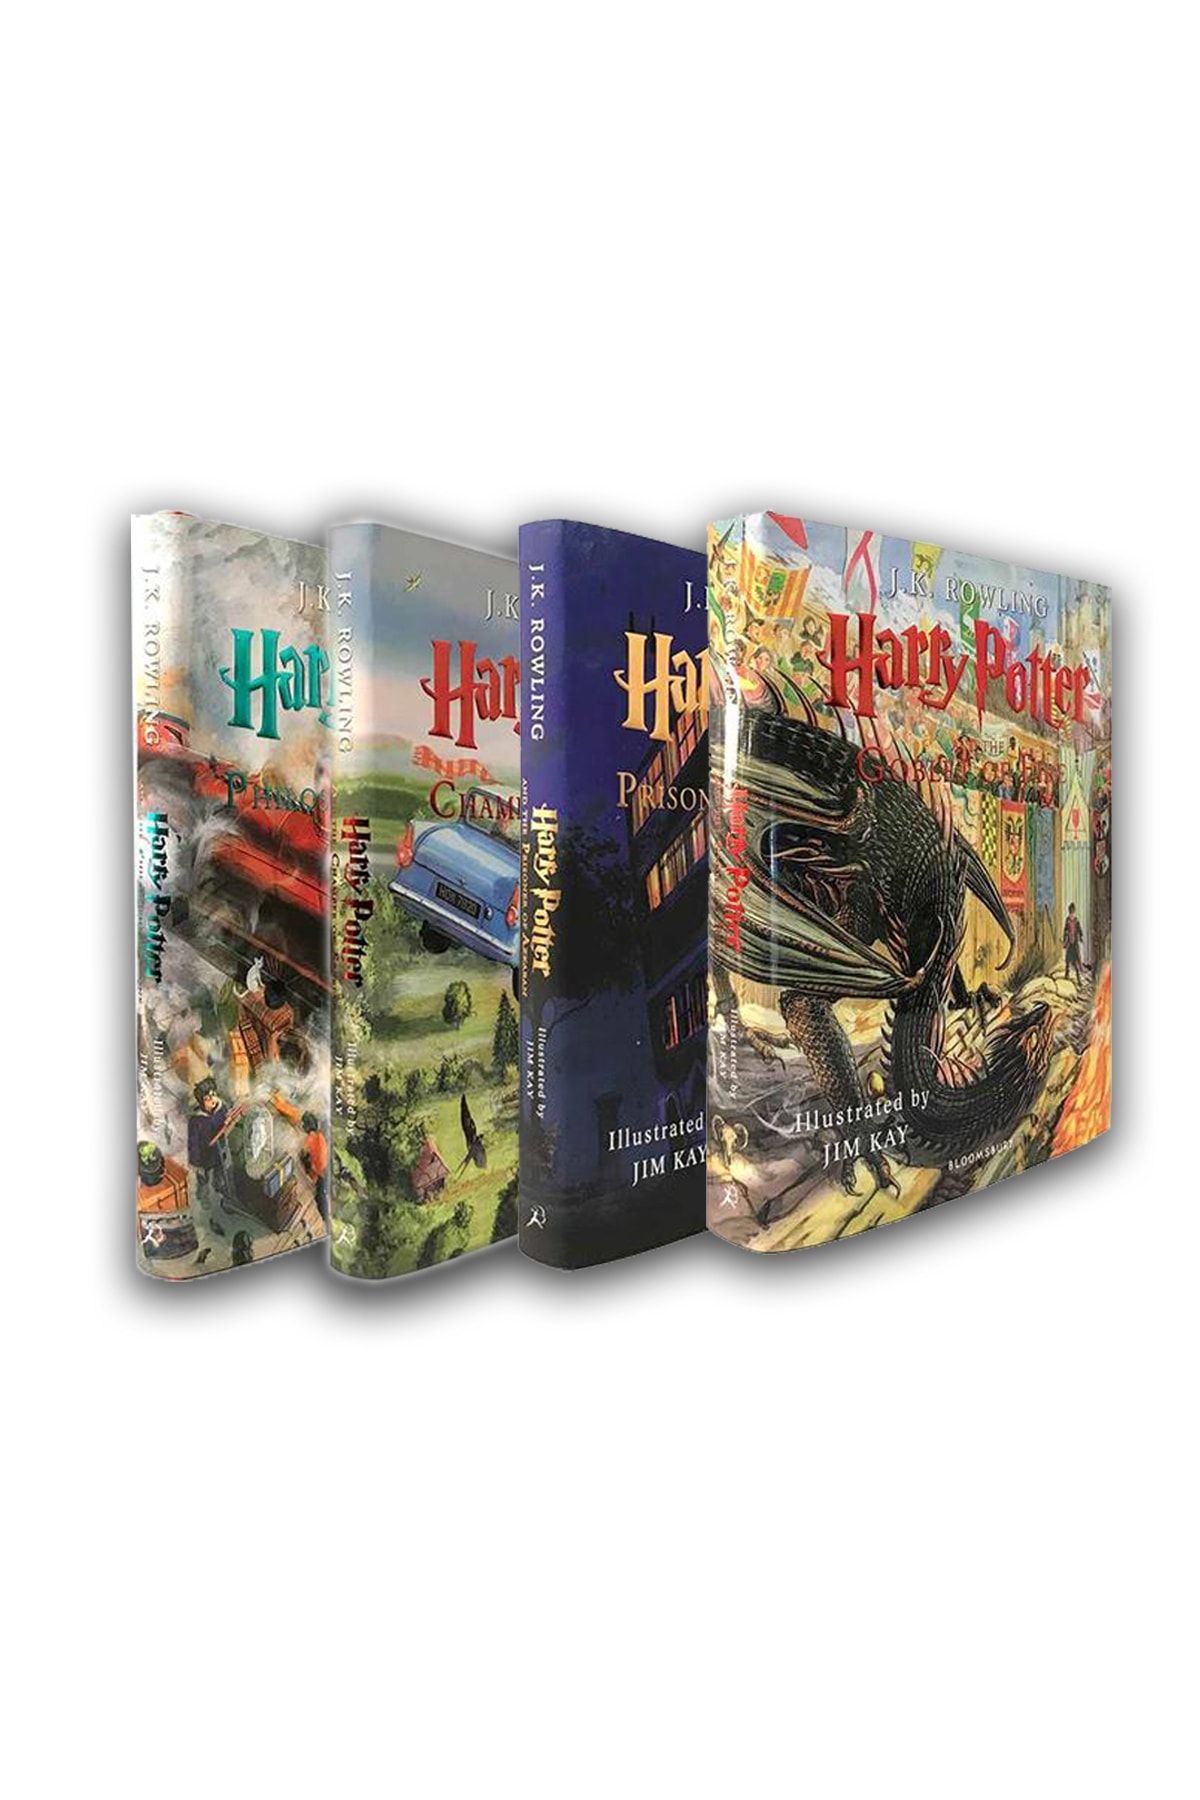 Bloomsbury Harry Potter Illustrated Edition (hardcover) 4 Books